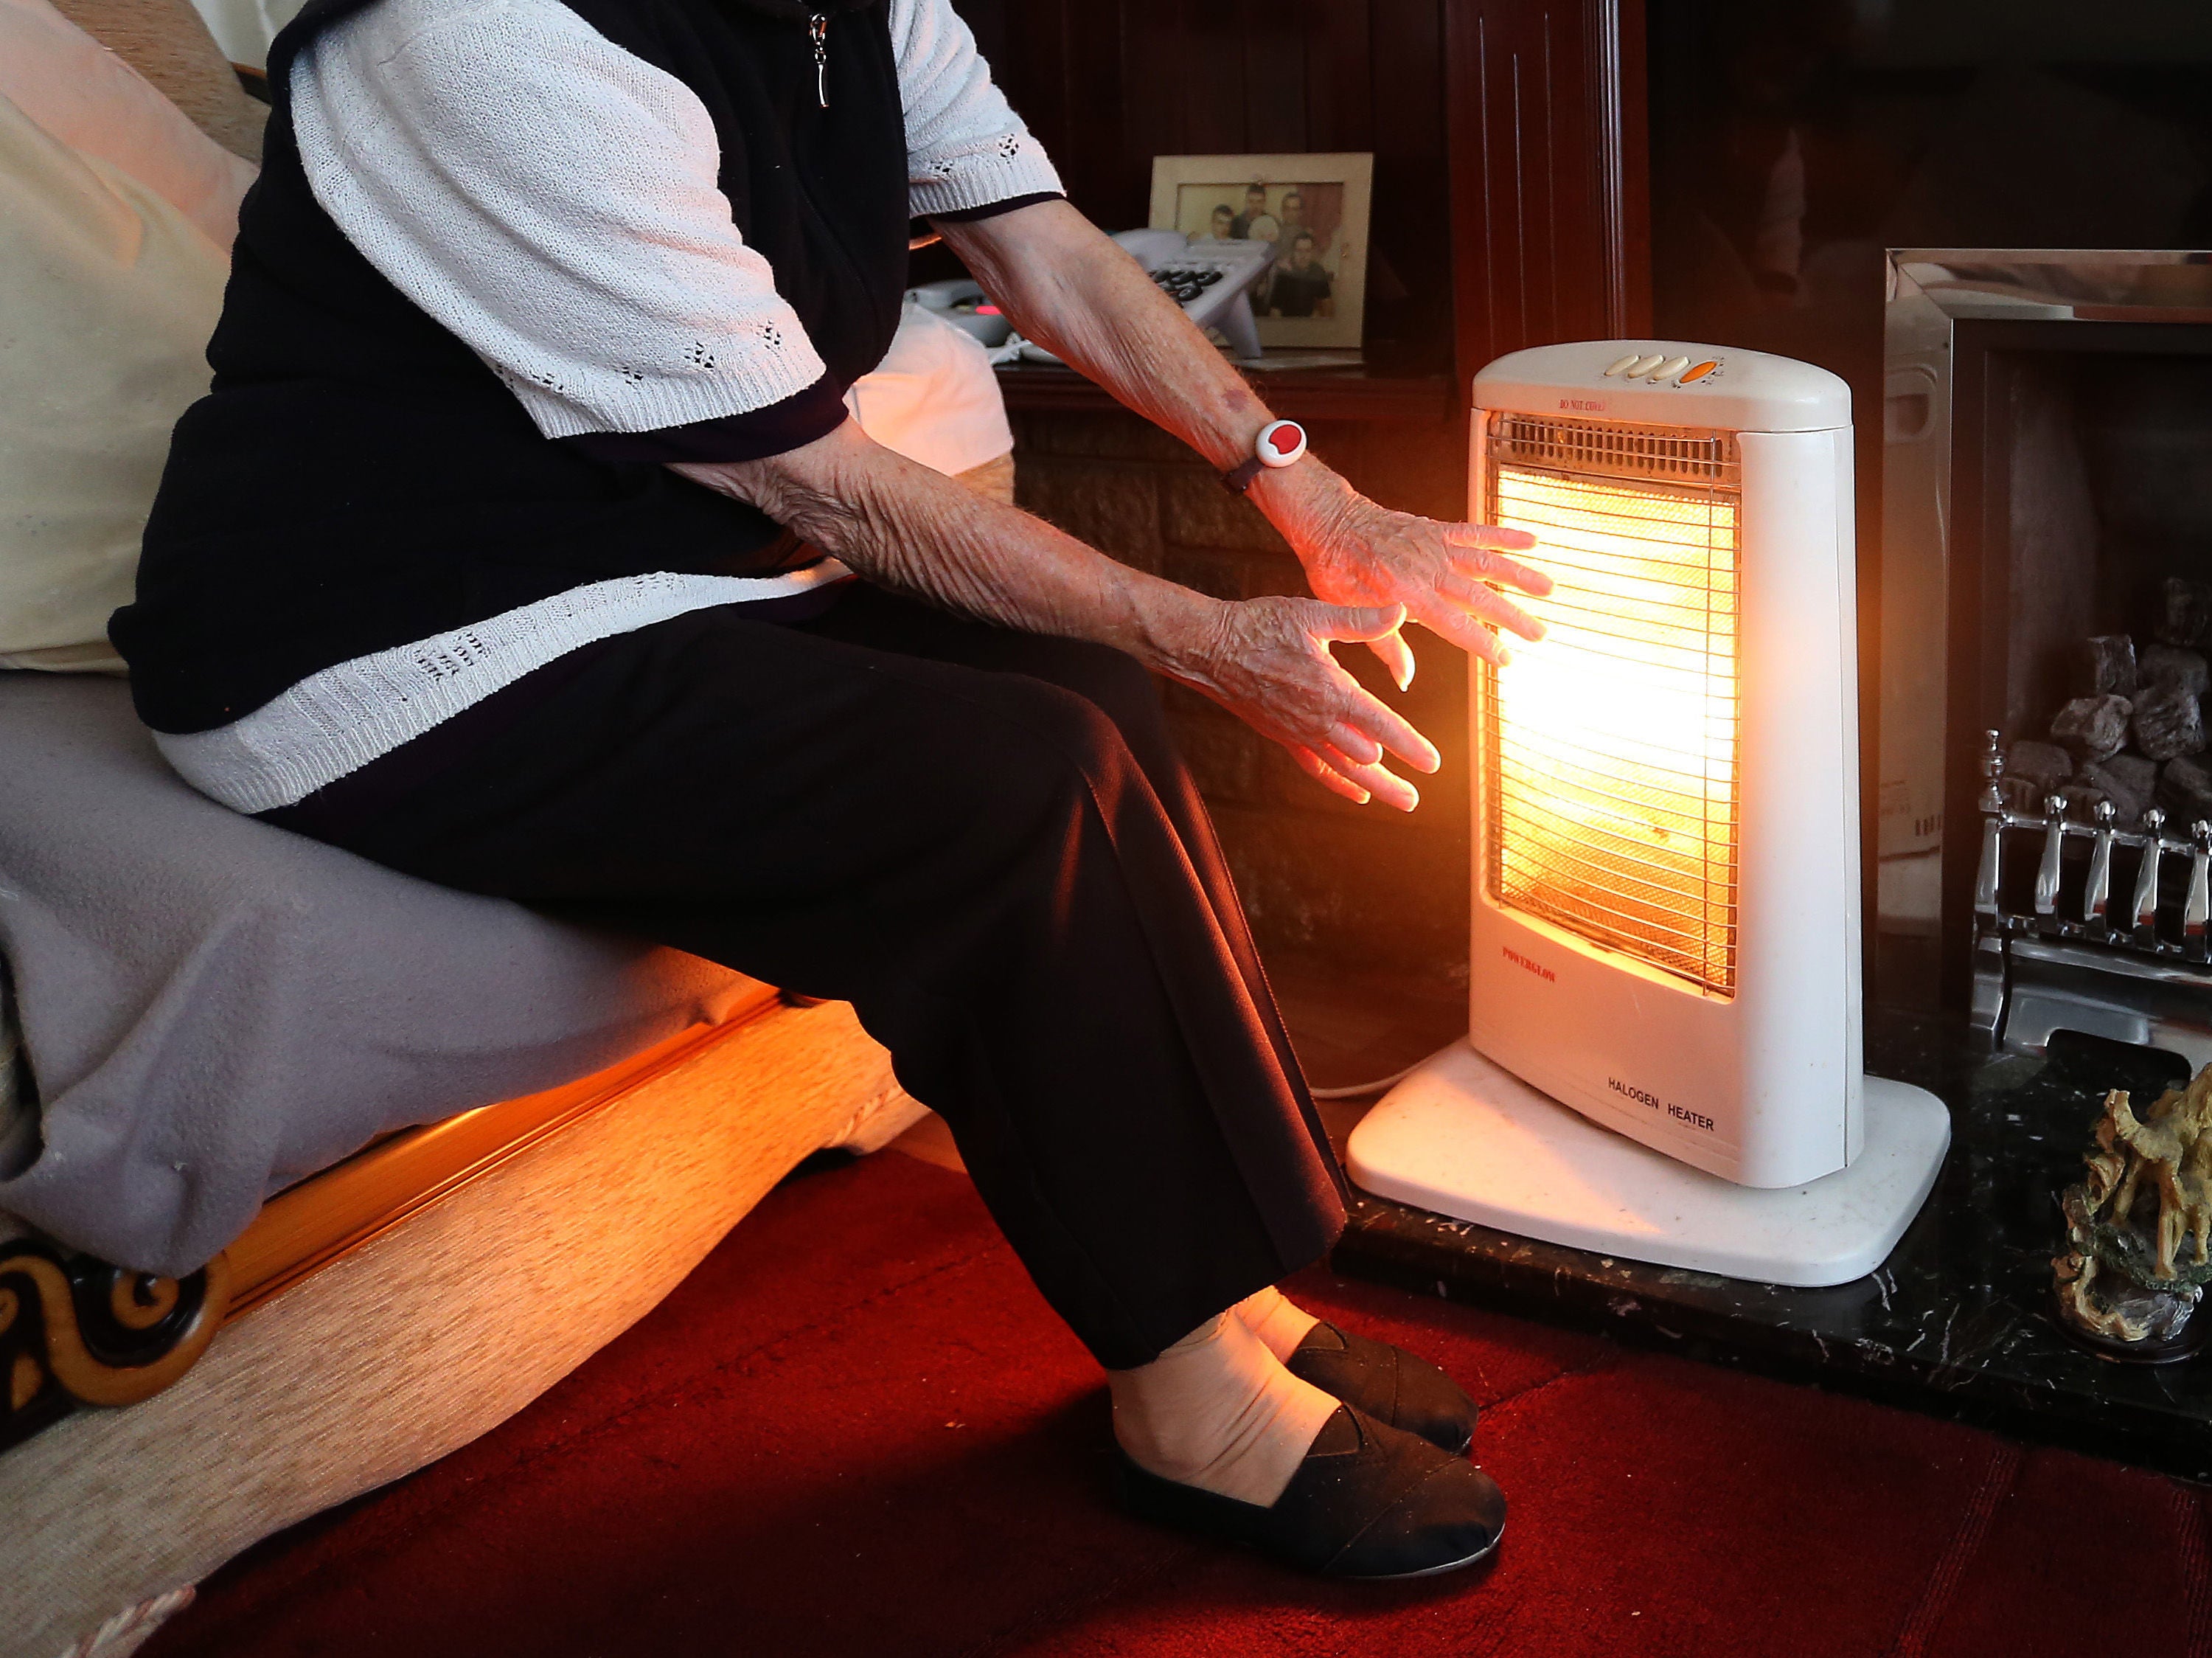 In October energy bills will eat up 22 per cent of the income of pensioners living alone, after housing costs